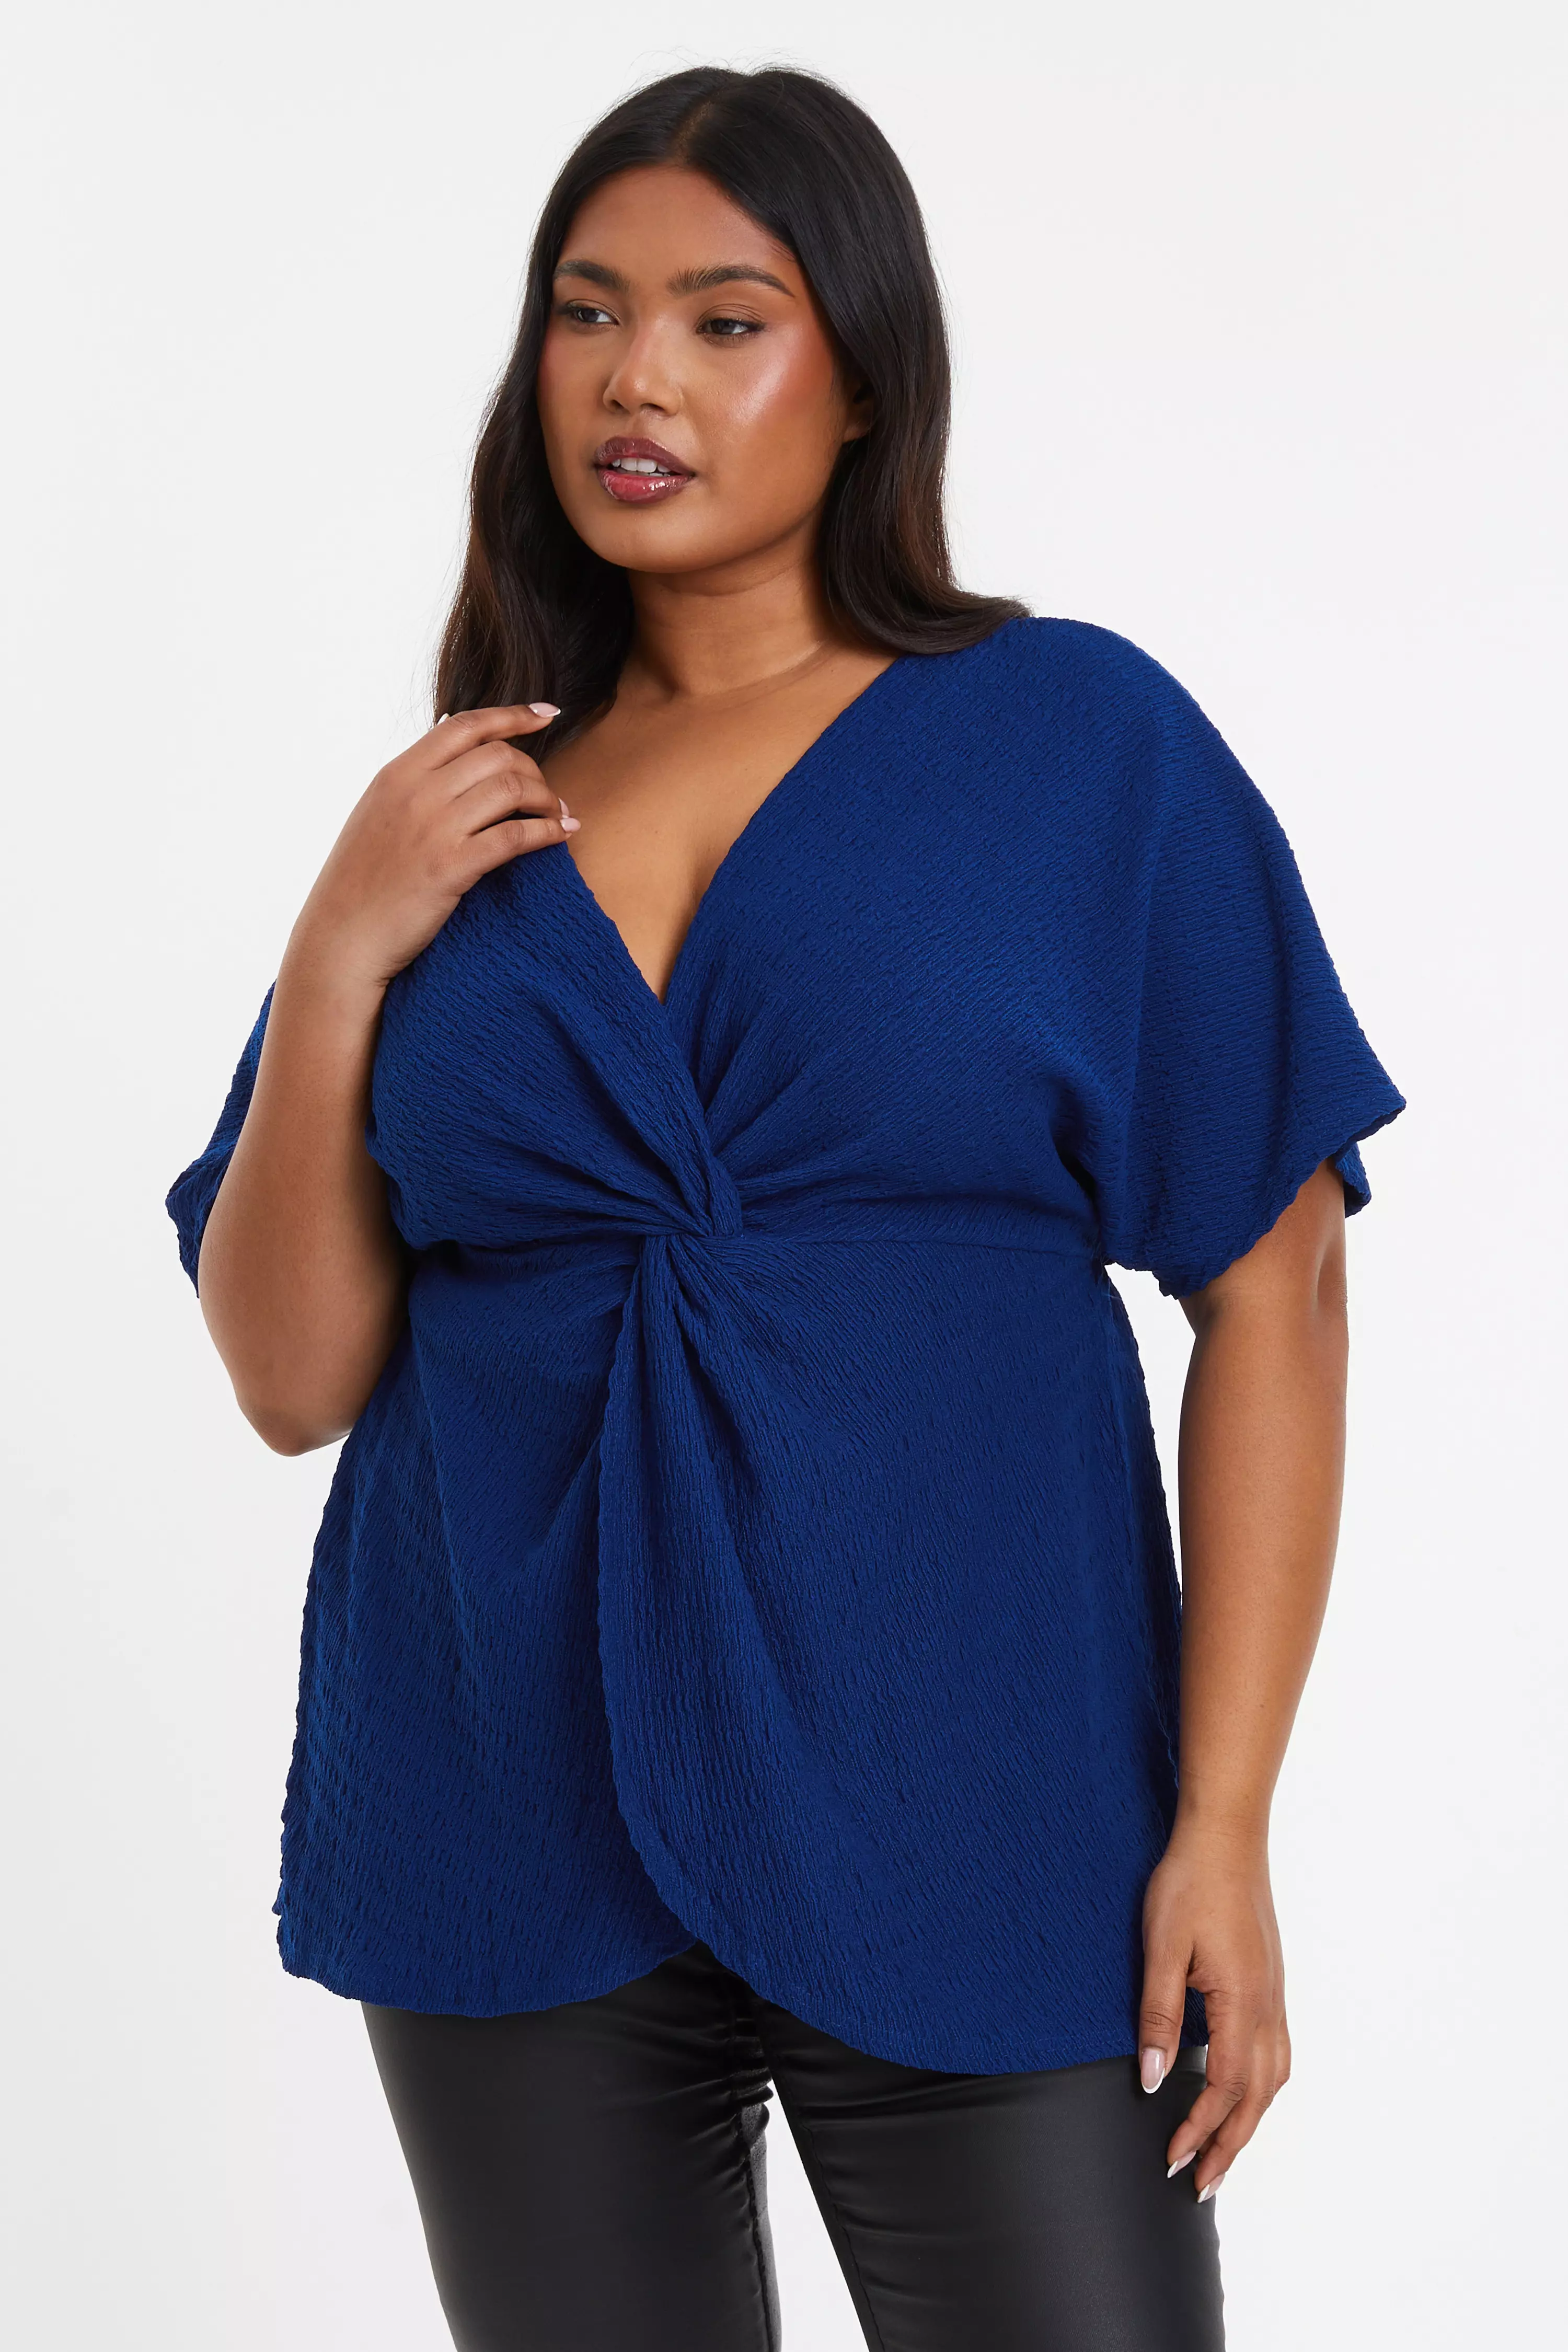 Plus Size Tops | Plus Size Party & Going Out Tops | QUIZ